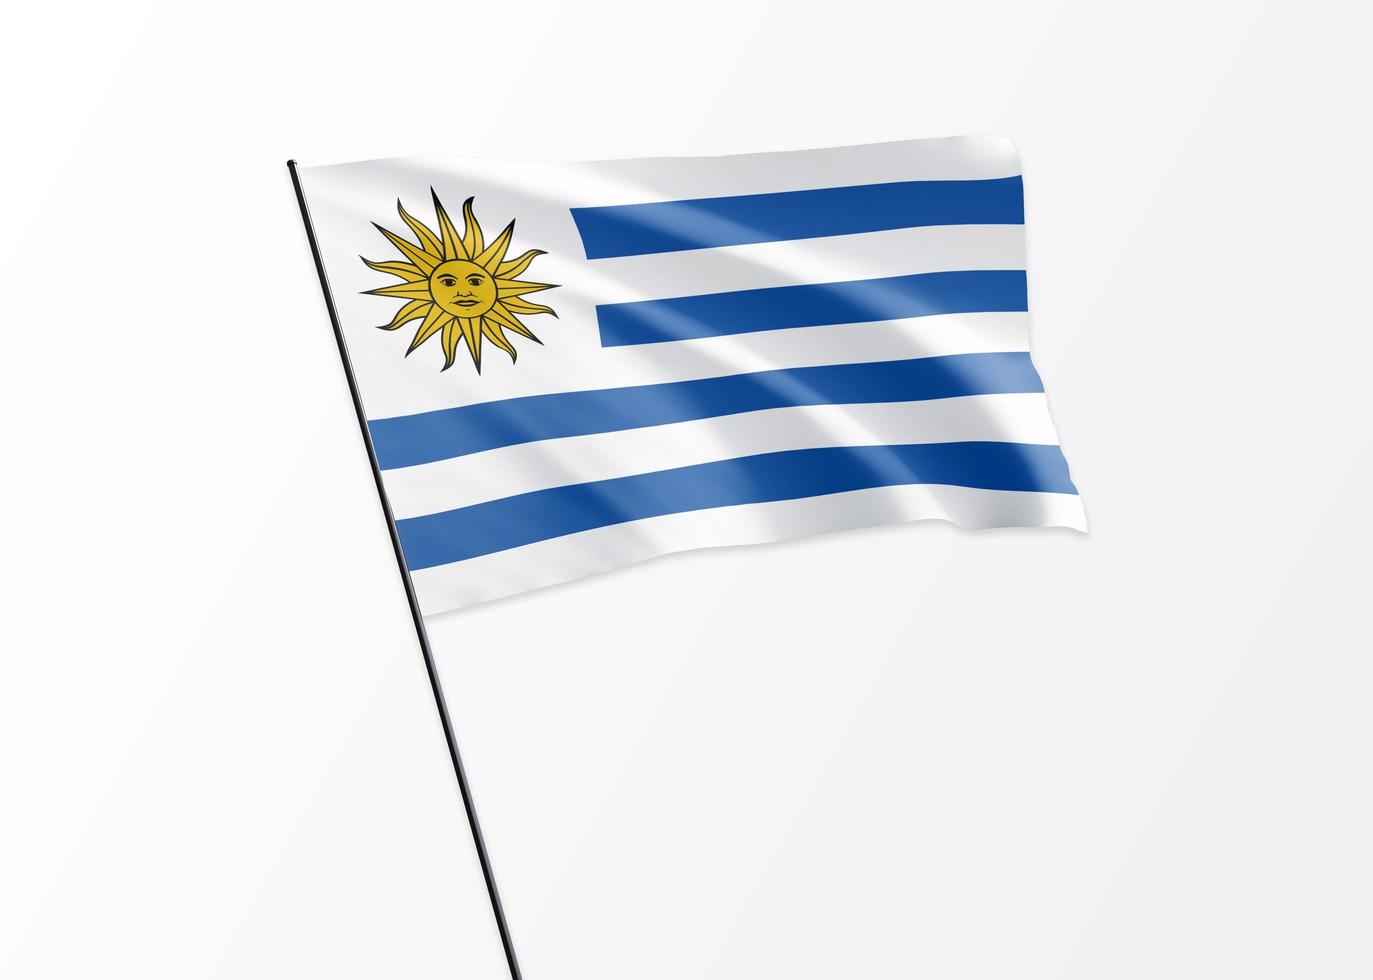 Uruguay flag flying high in the isolated background Uruguay independence day August 25. 3D illustration world national flag collection photo